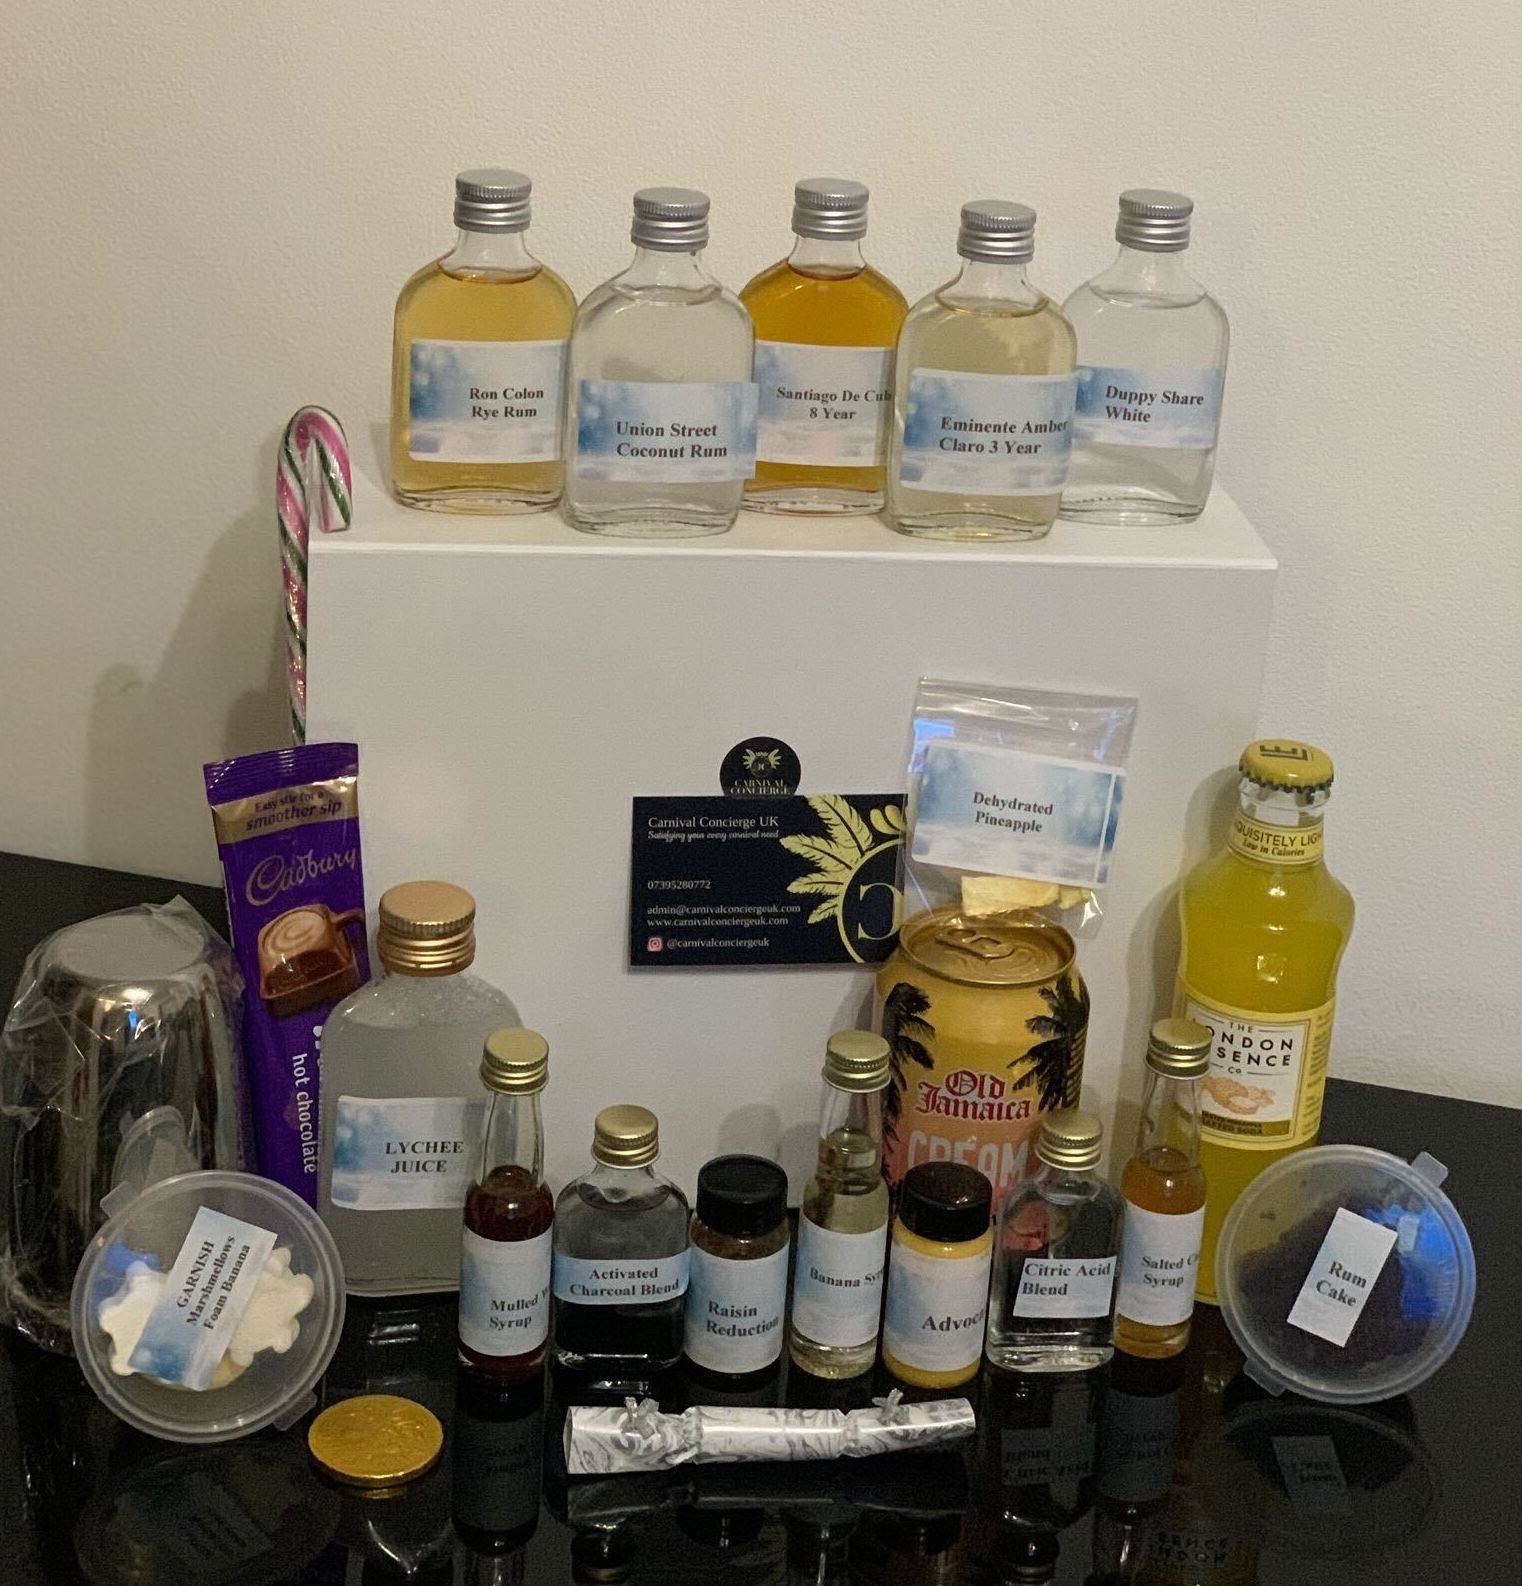 The contents of an at-home cocktail kit from Carnival Concierge.